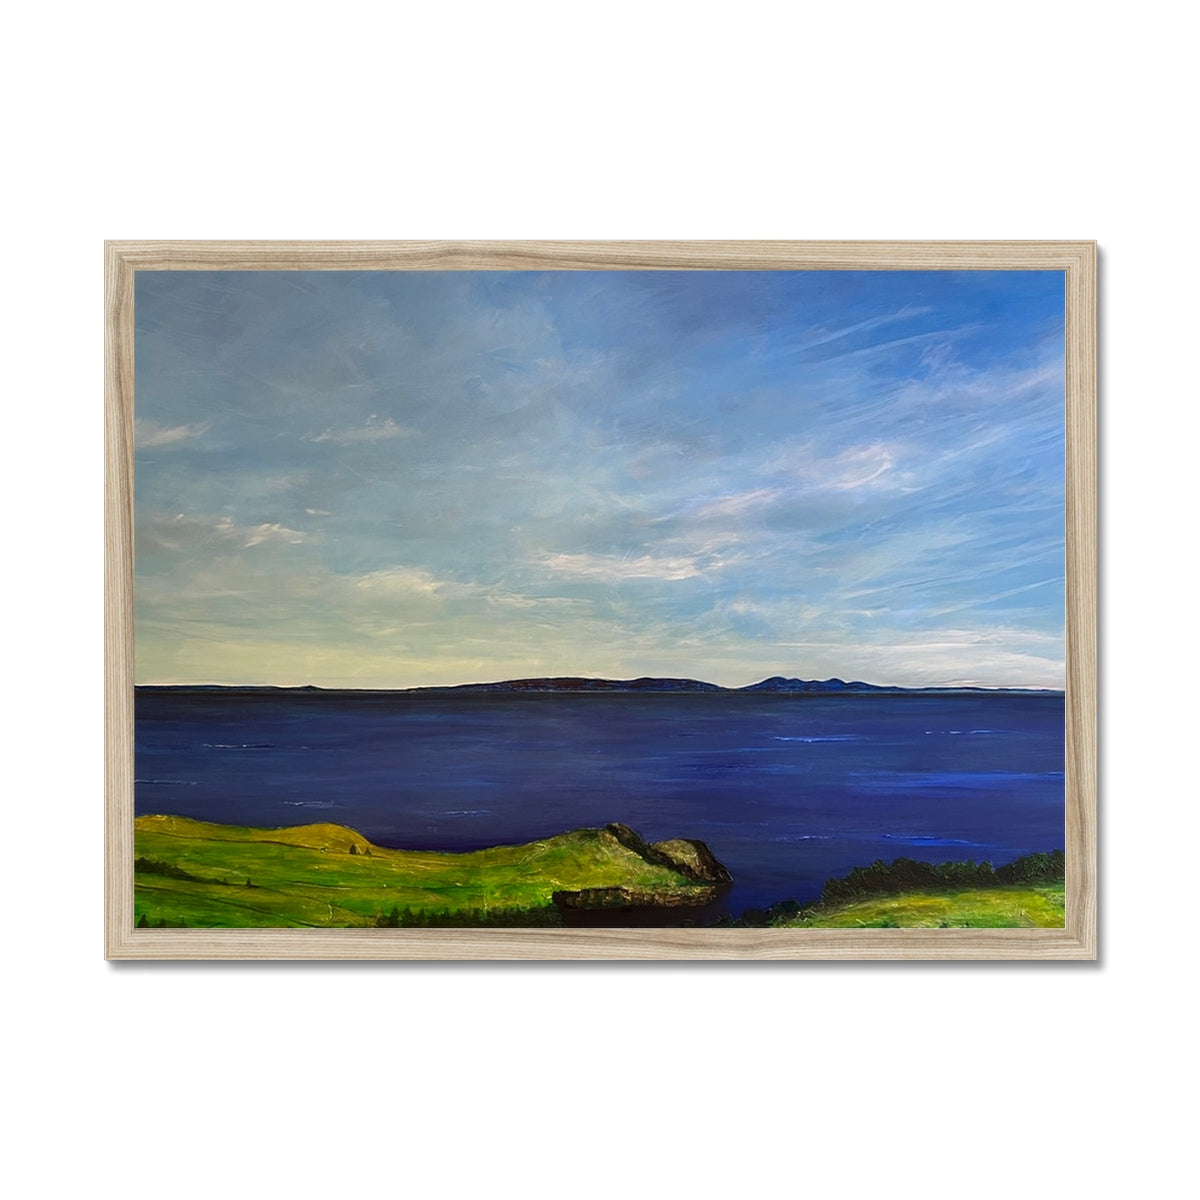 From Ireland To Scotland Painting | Framed Prints From Scotland-Framed Prints-World Art Gallery-A2 Landscape-Natural Frame-Paintings, Prints, Homeware, Art Gifts From Scotland By Scottish Artist Kevin Hunter